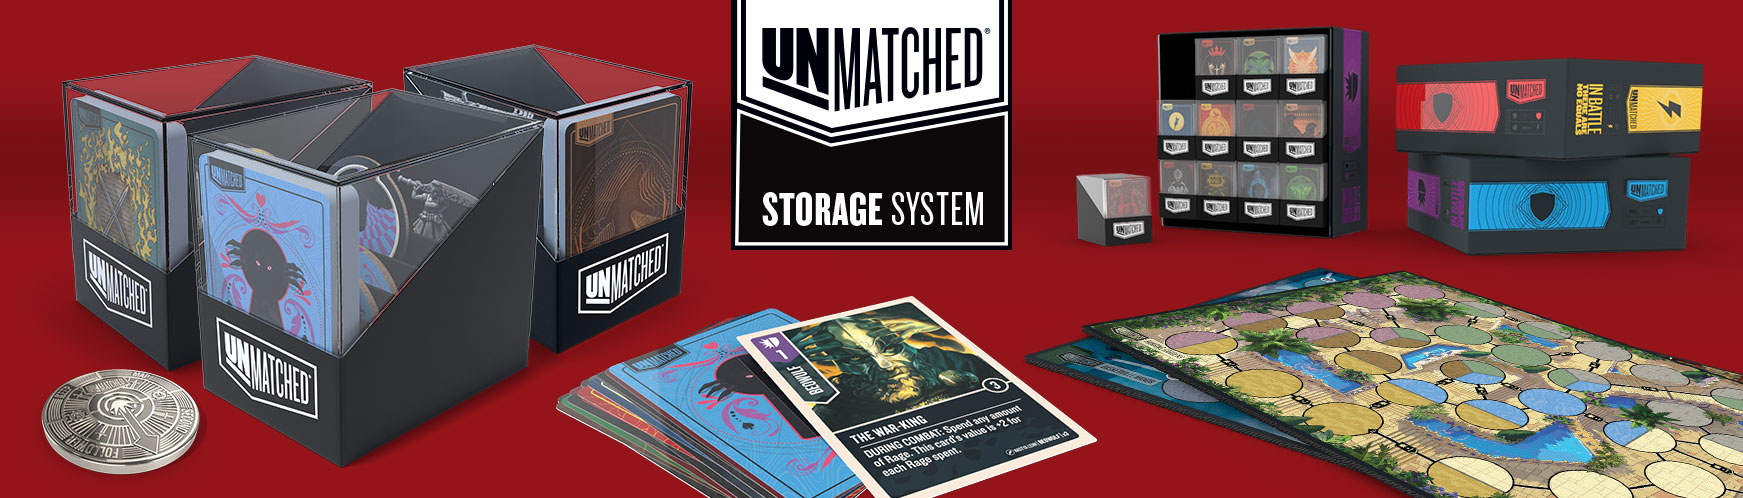 NEW Unmatched Storage System!! 